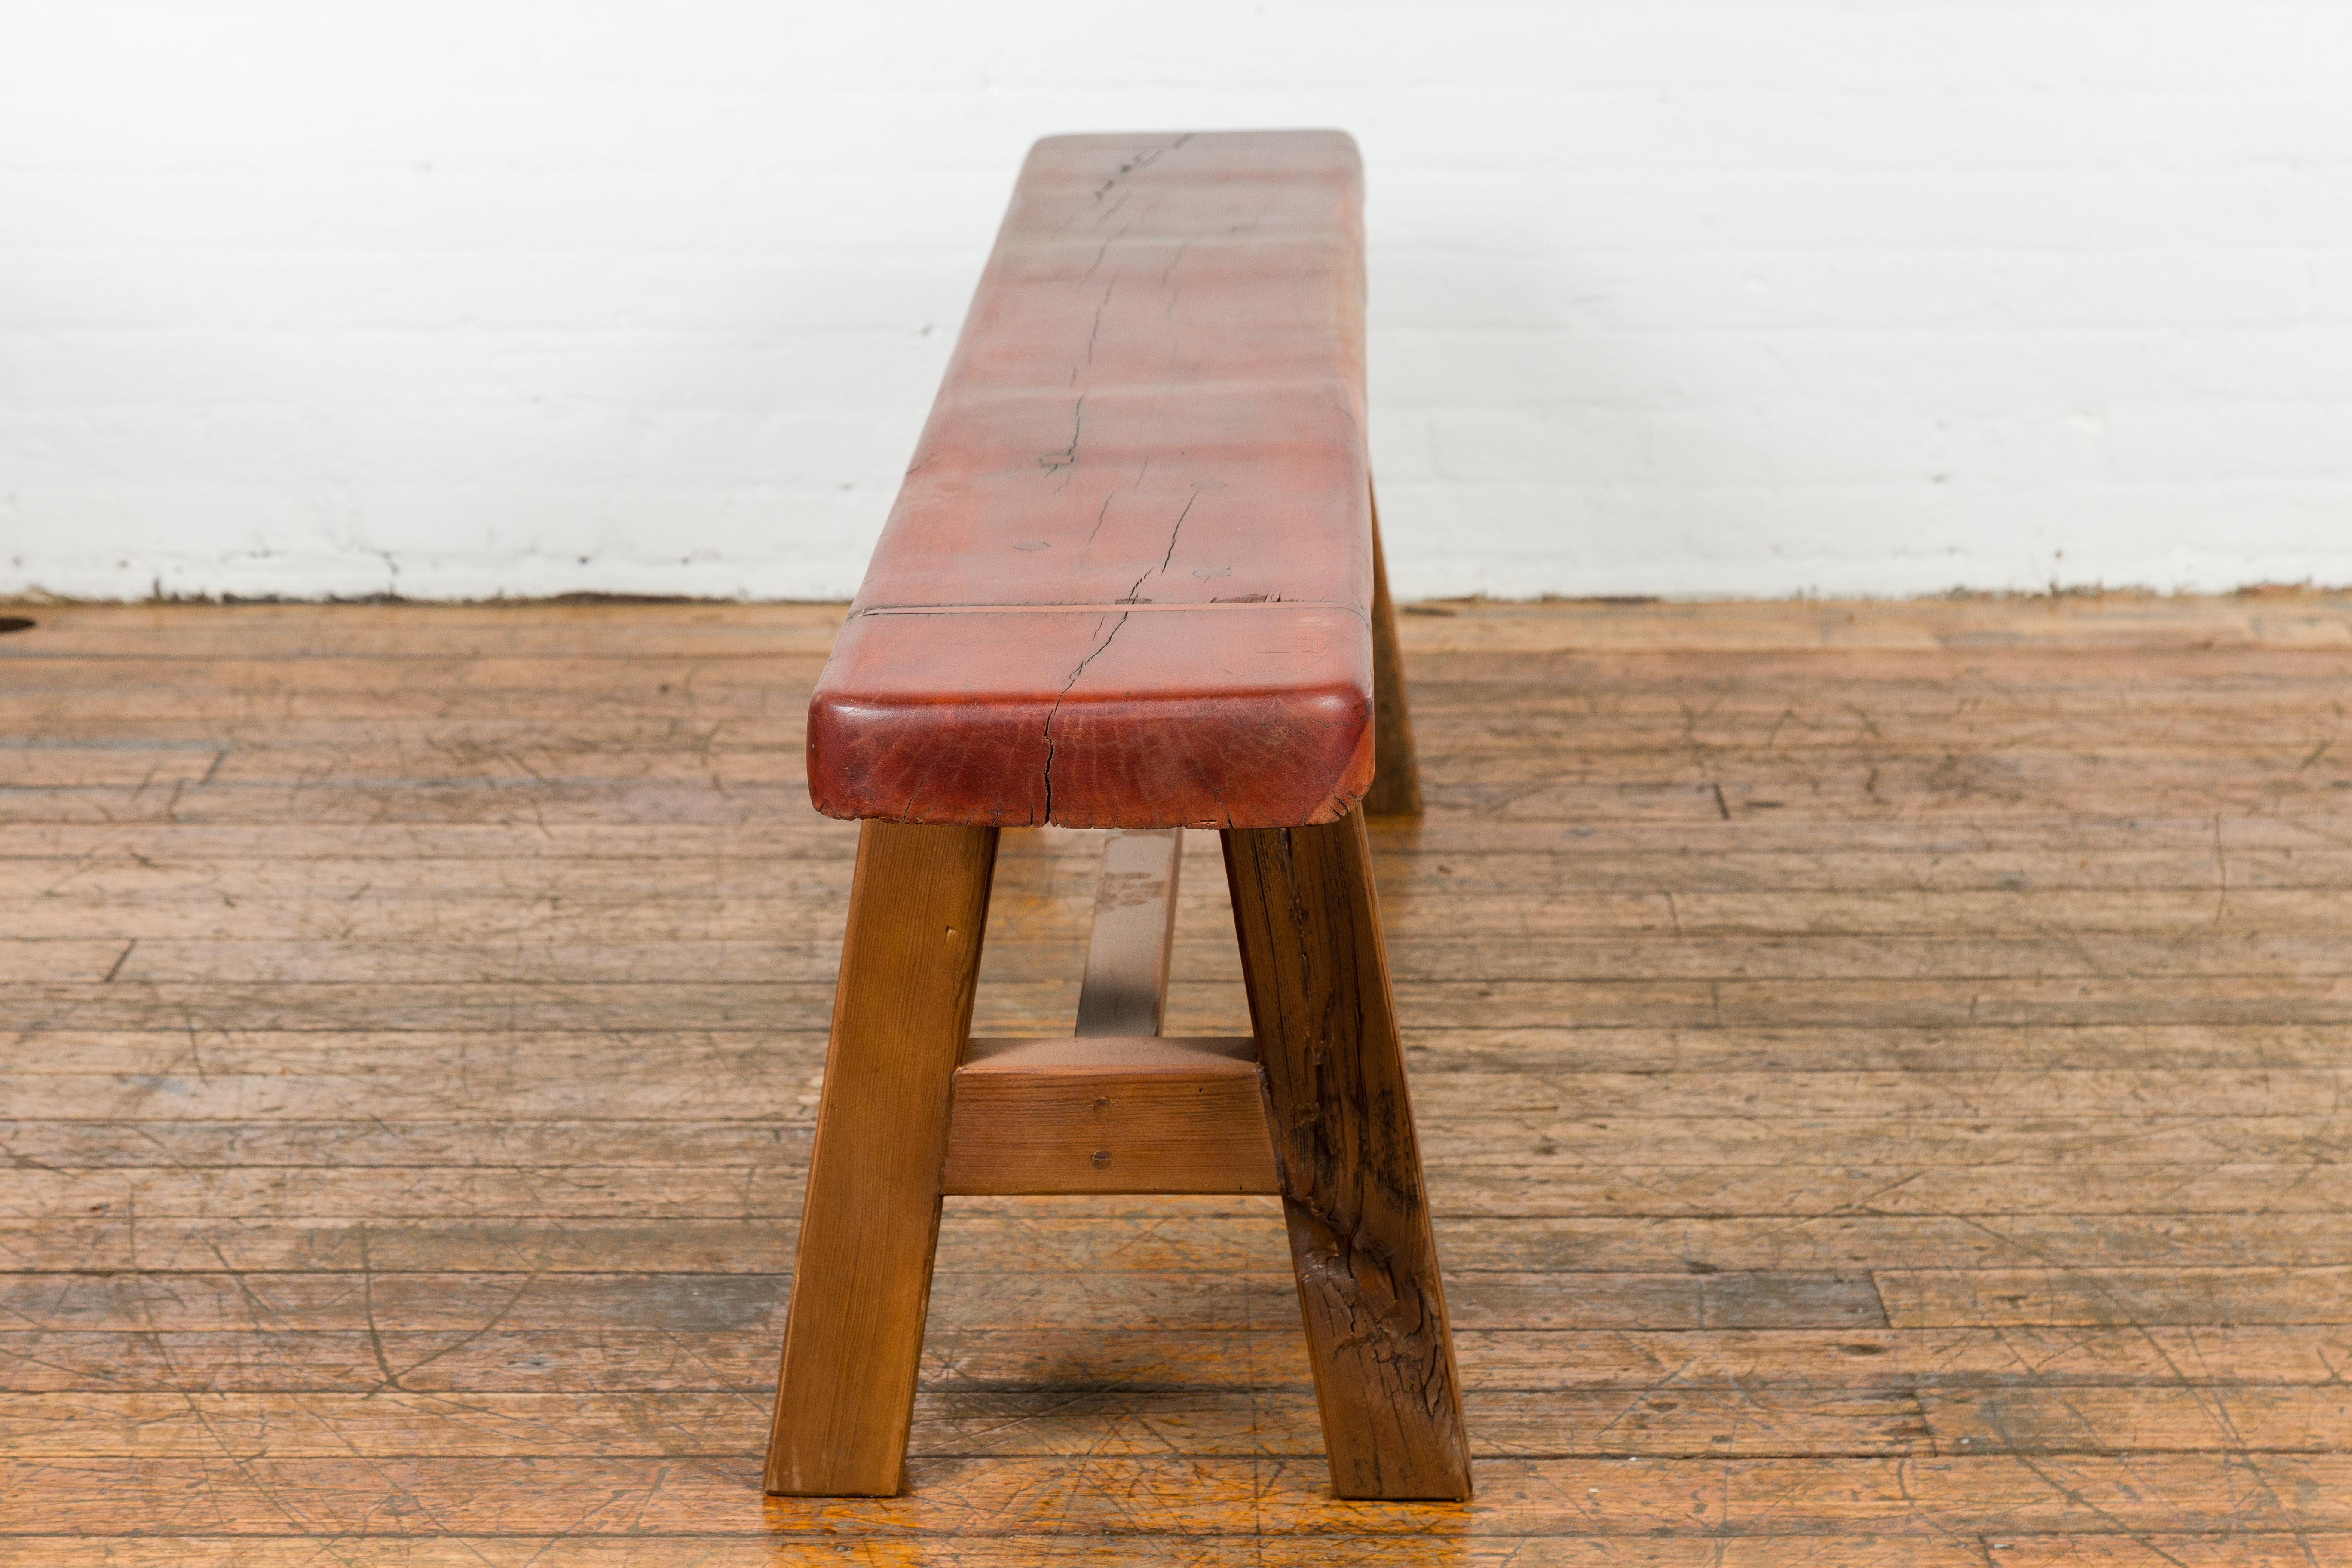 Mingei Style Rustic A-Frame Wooden Bench Made of Railroad Ties with Stretcher For Sale 3